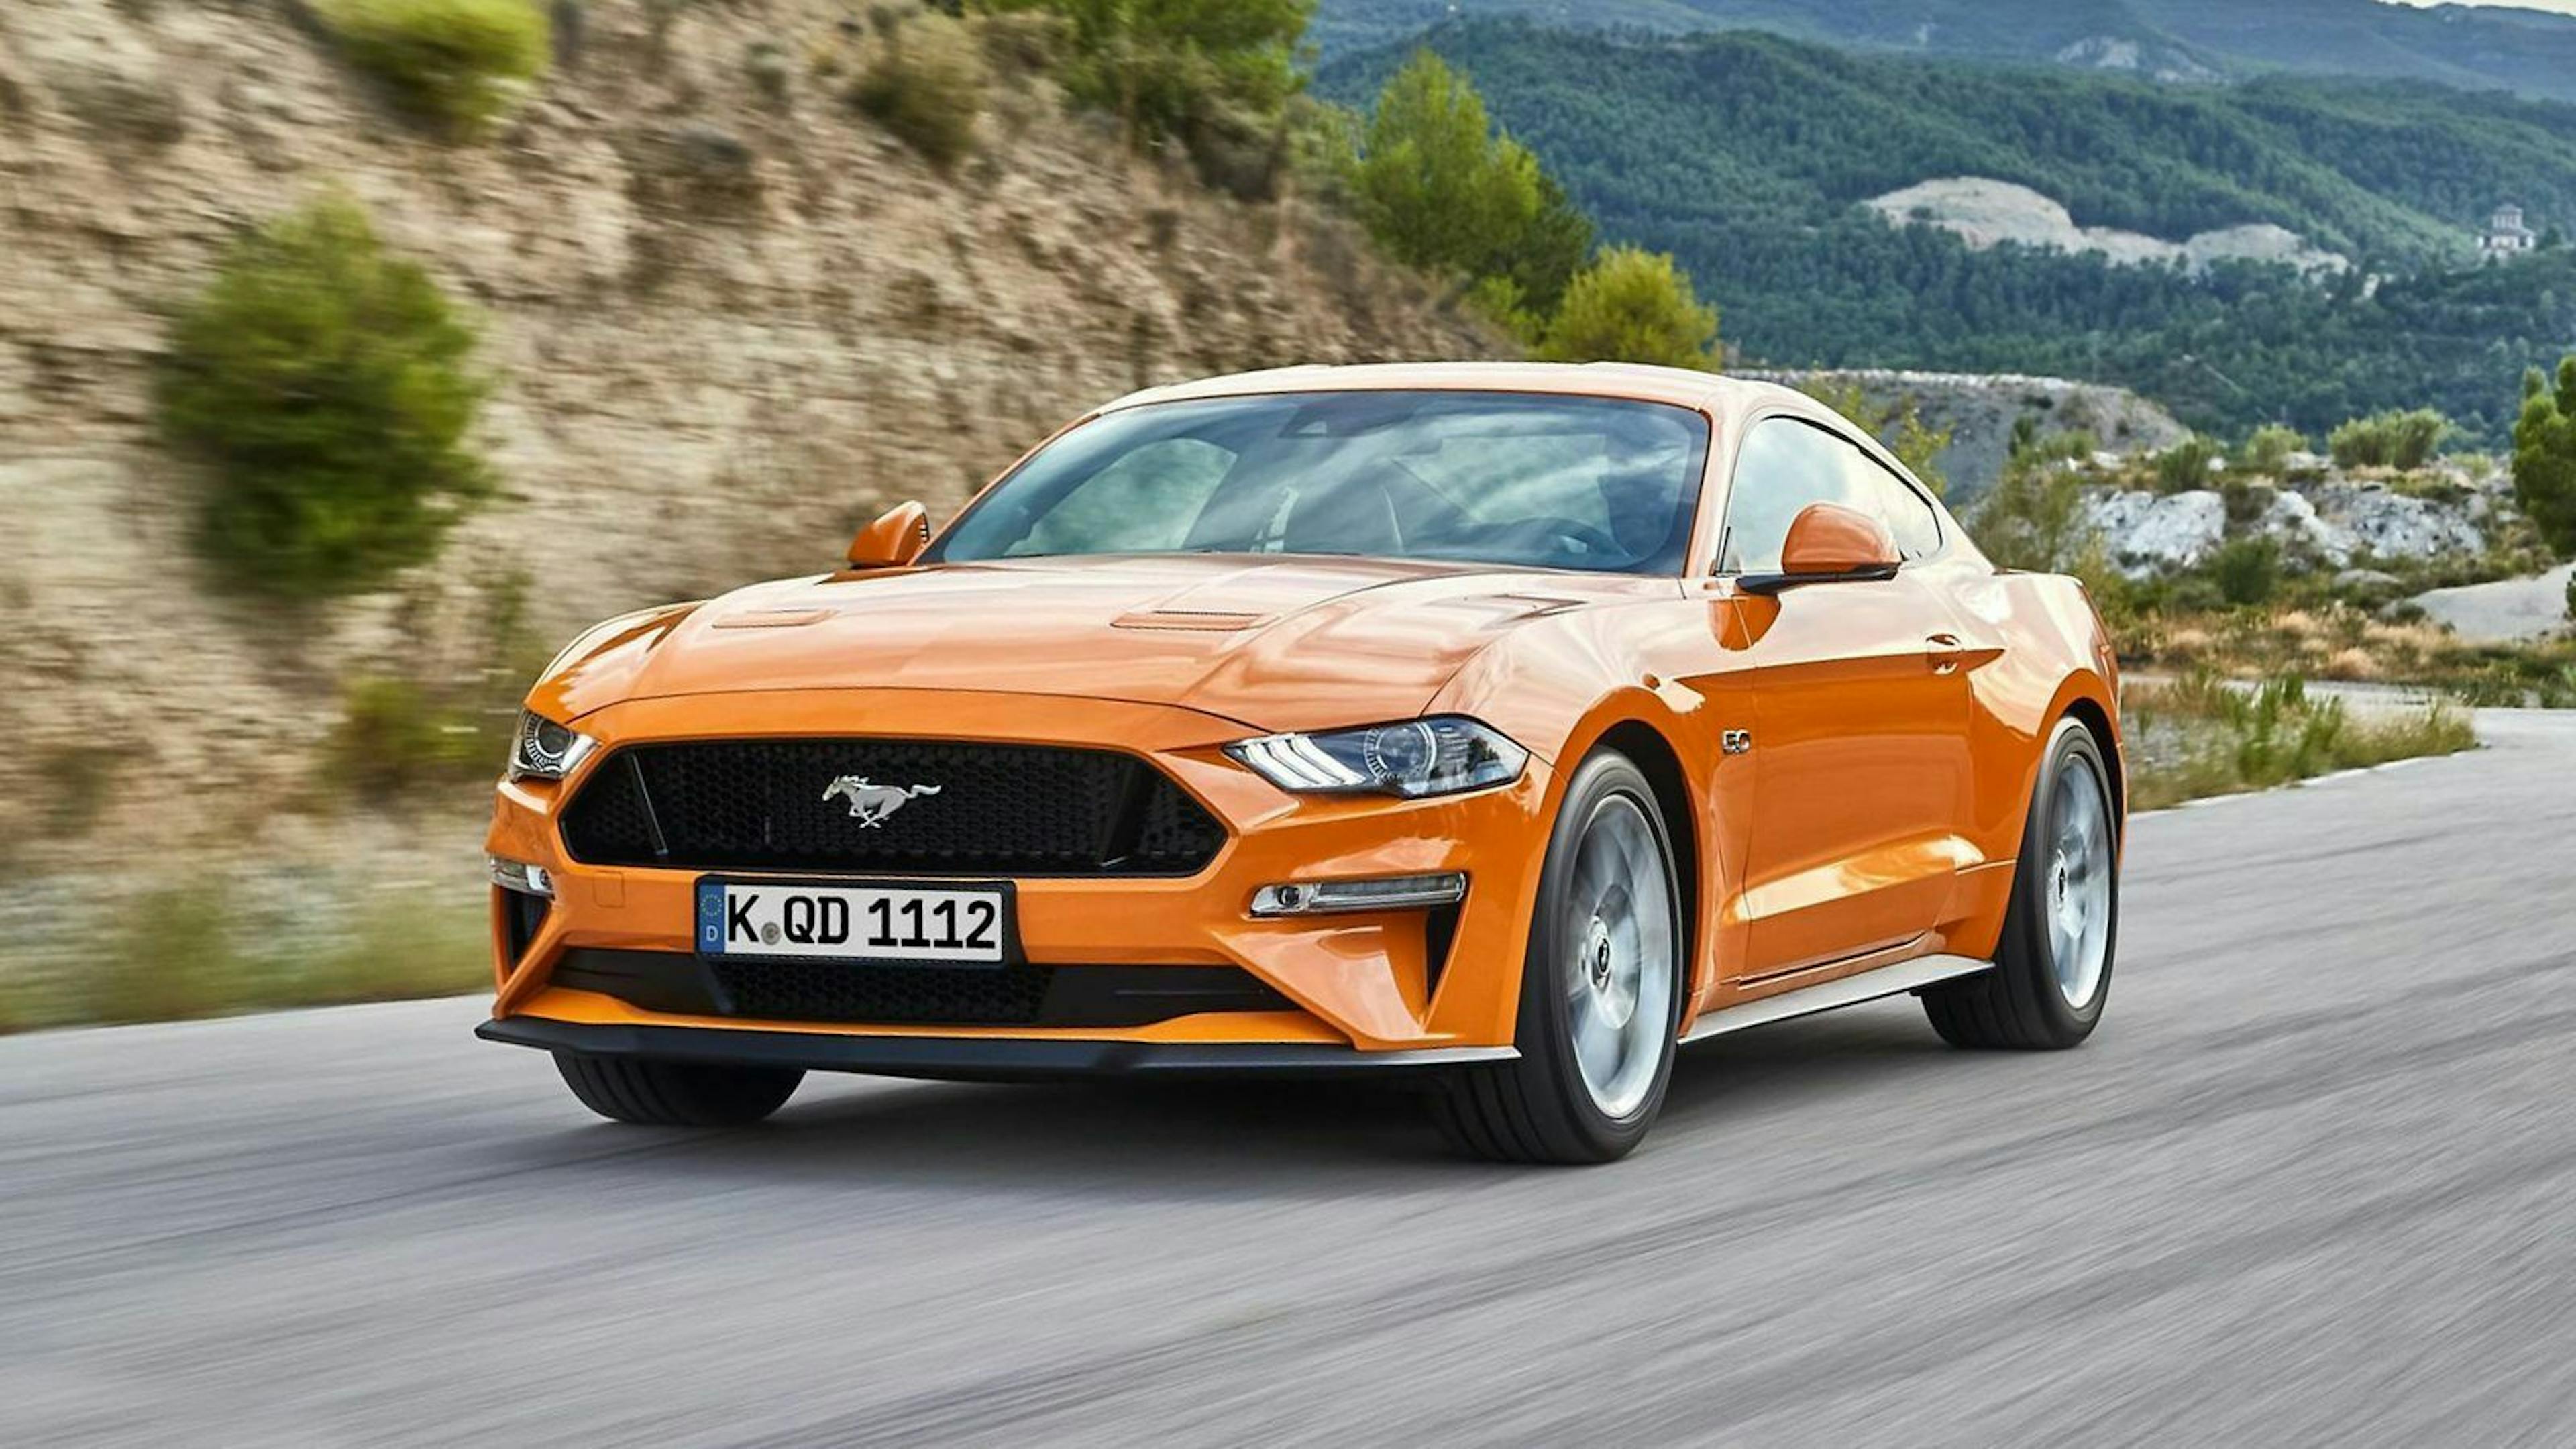 Ford Mustang in der Frontansicht, fahrend